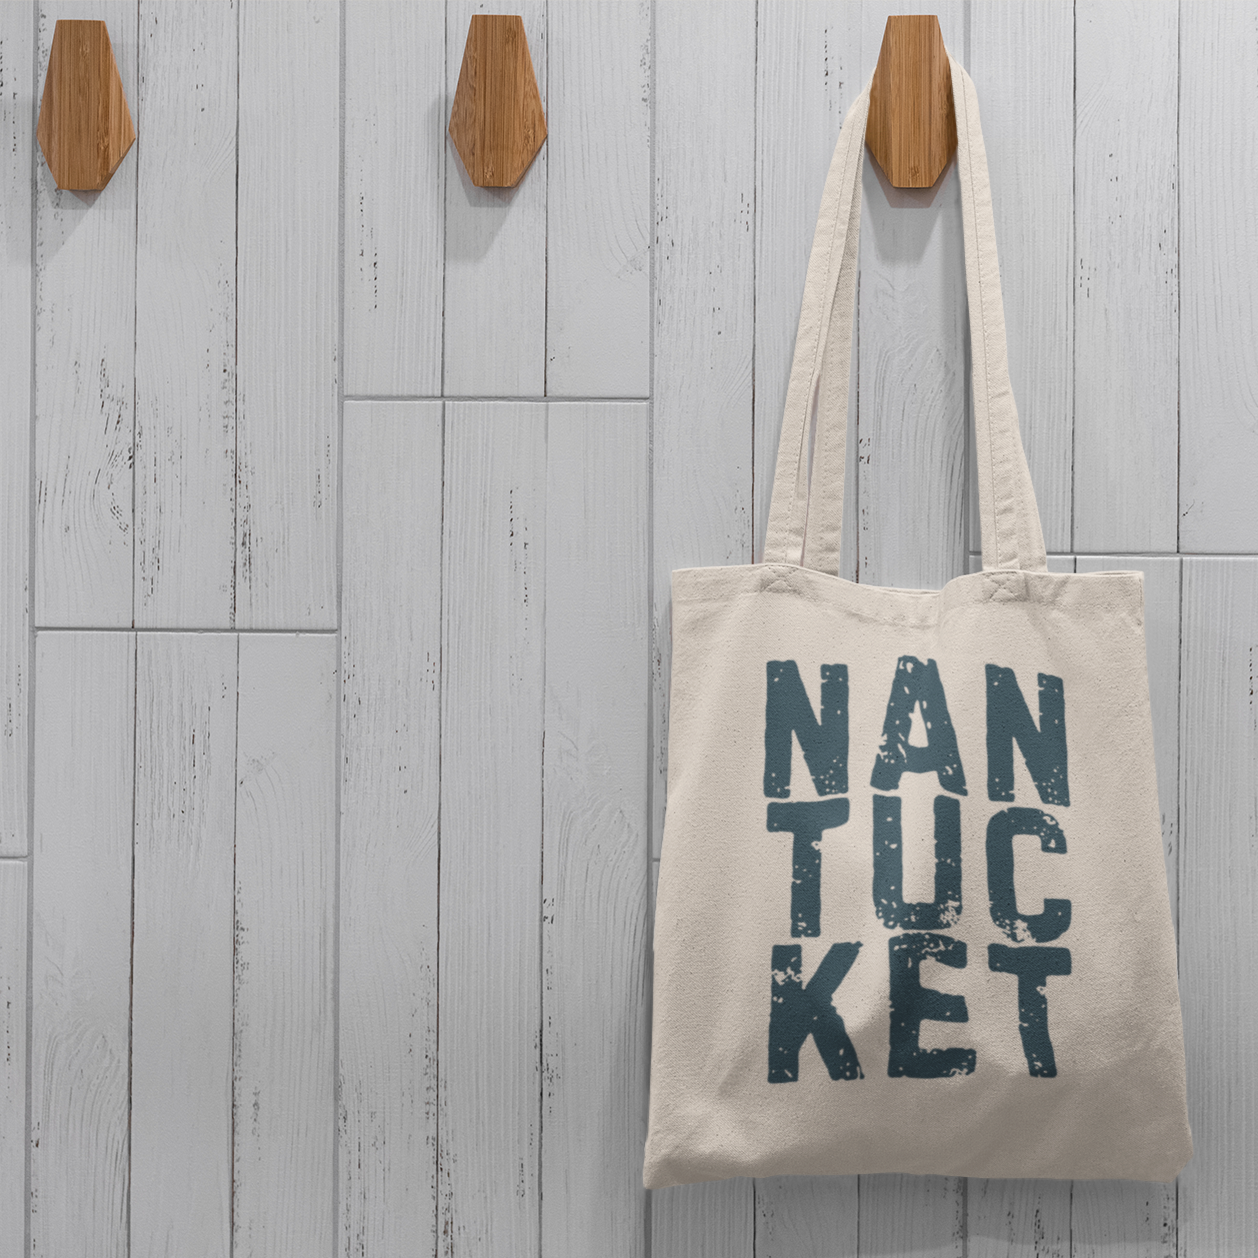 Nantucket Cotton Canvas Tote Bag - Perfect for Beach, Shopping, and Everyday Use